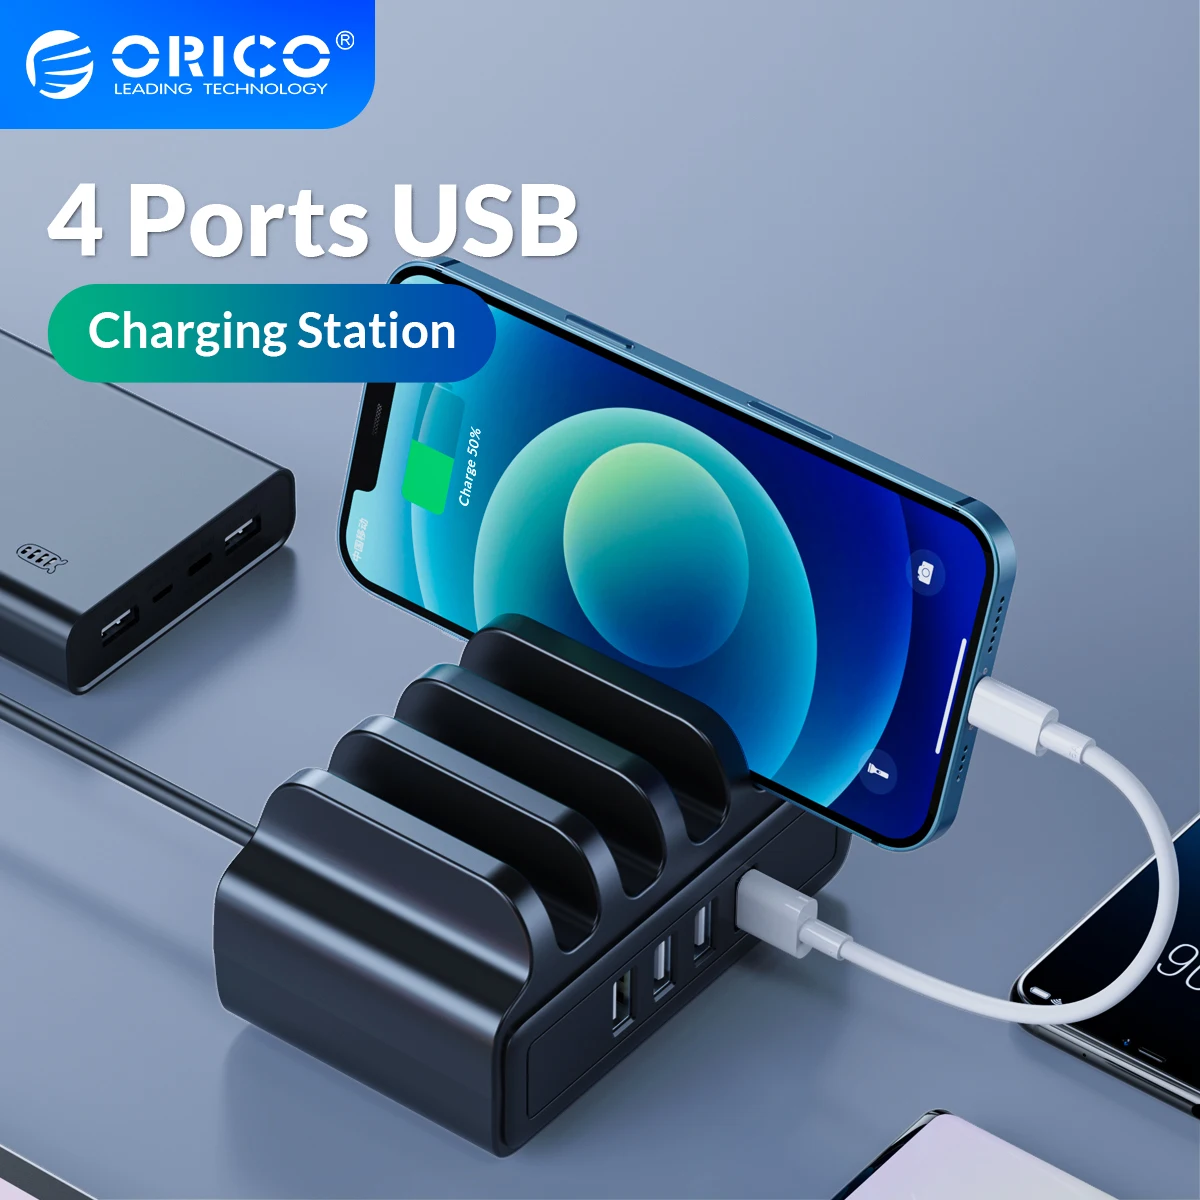 

ORICO 4 Ports USB Charger Charging Station 30W Max with Phone Stand for iPhone Samsung Xiaomi VIVO Cell Phone Earbuds Tablet